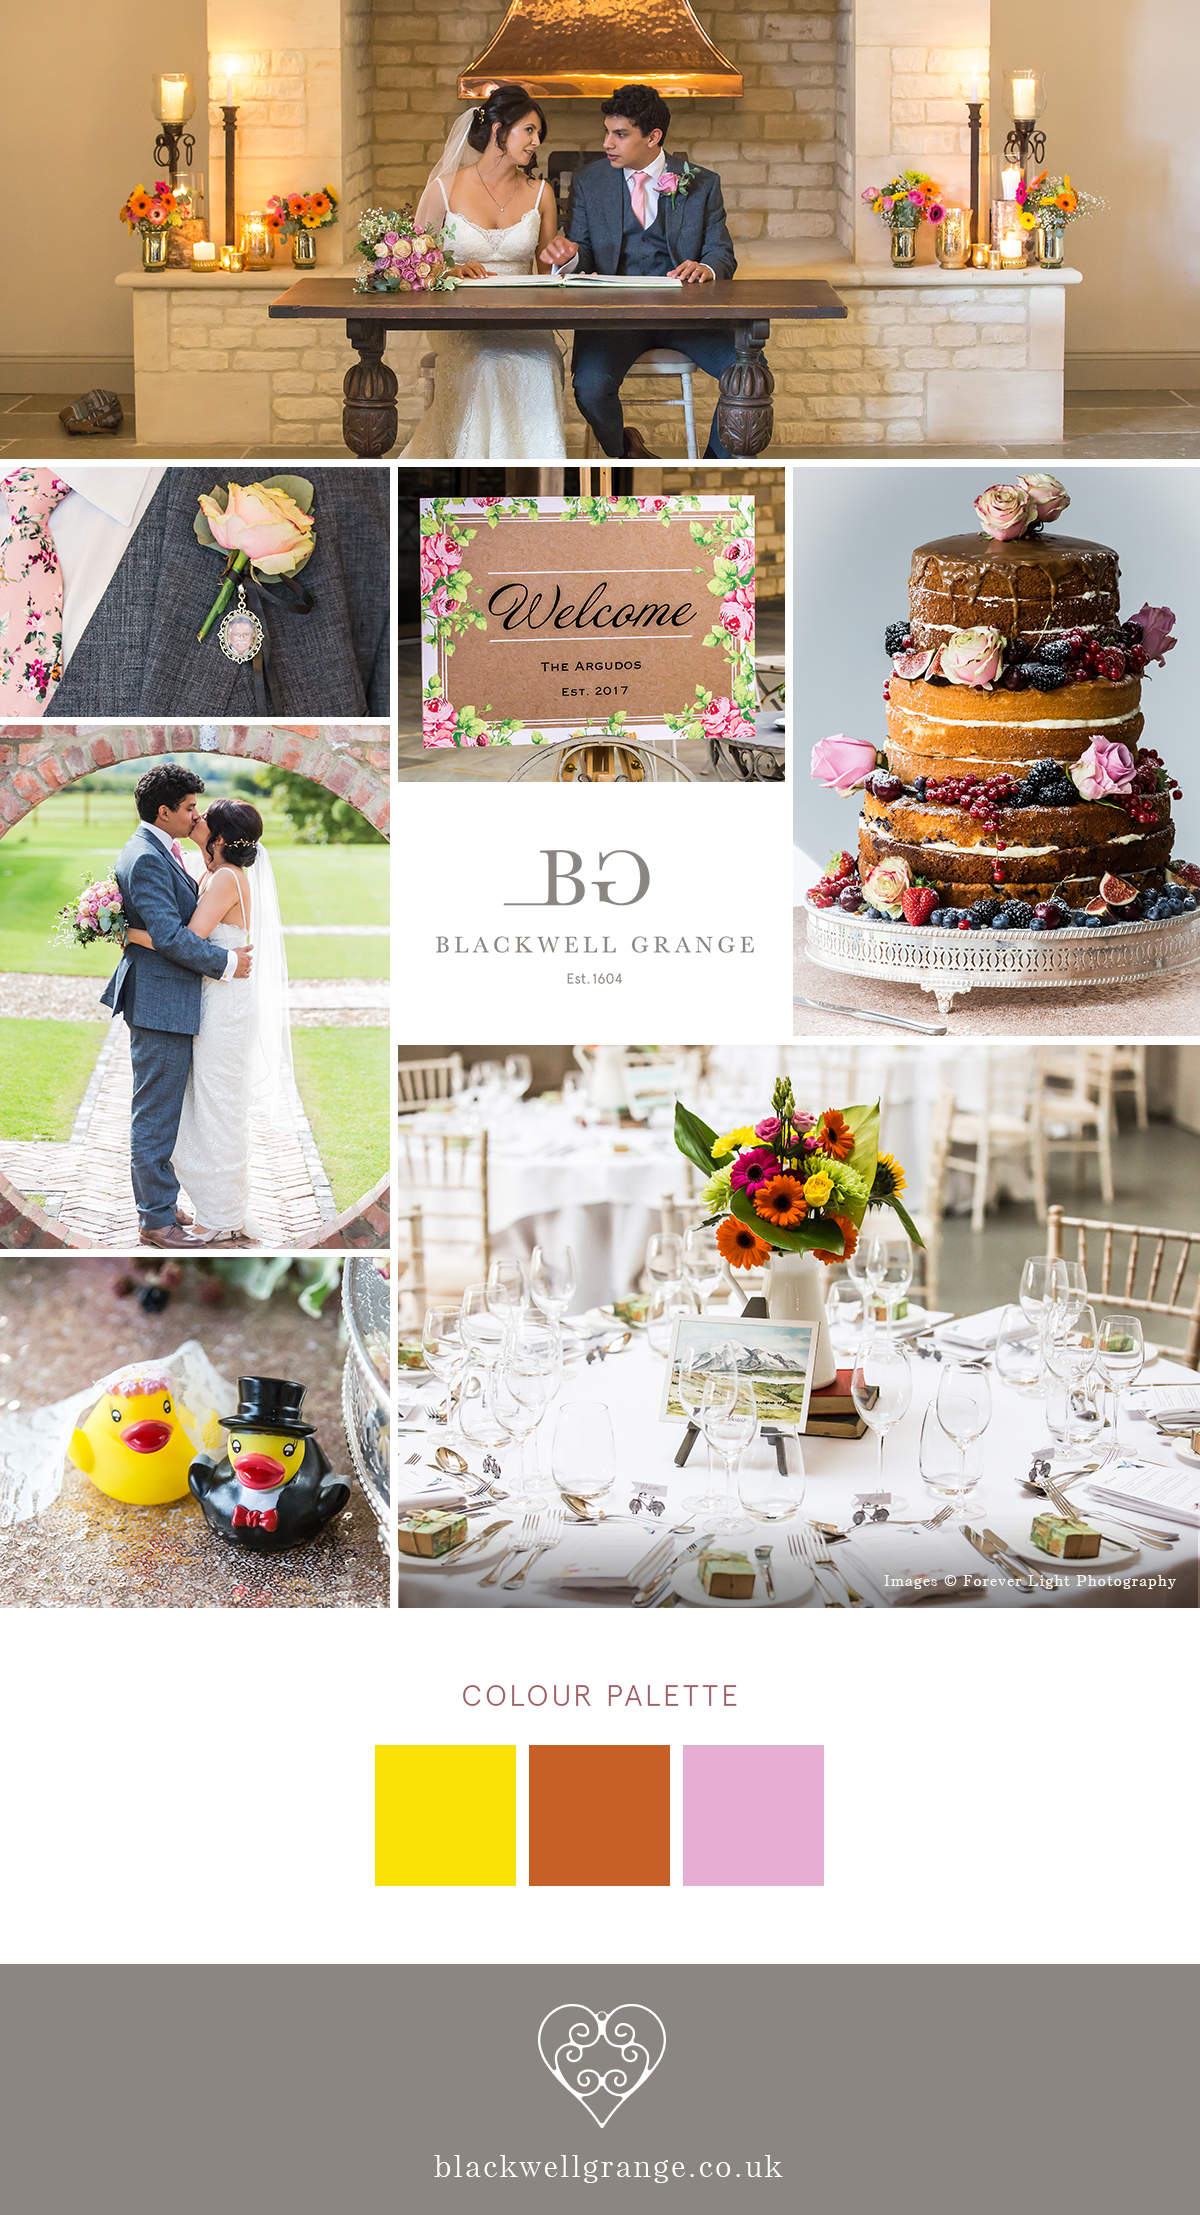 Alice and José's real life wedding at Blackwell Grange